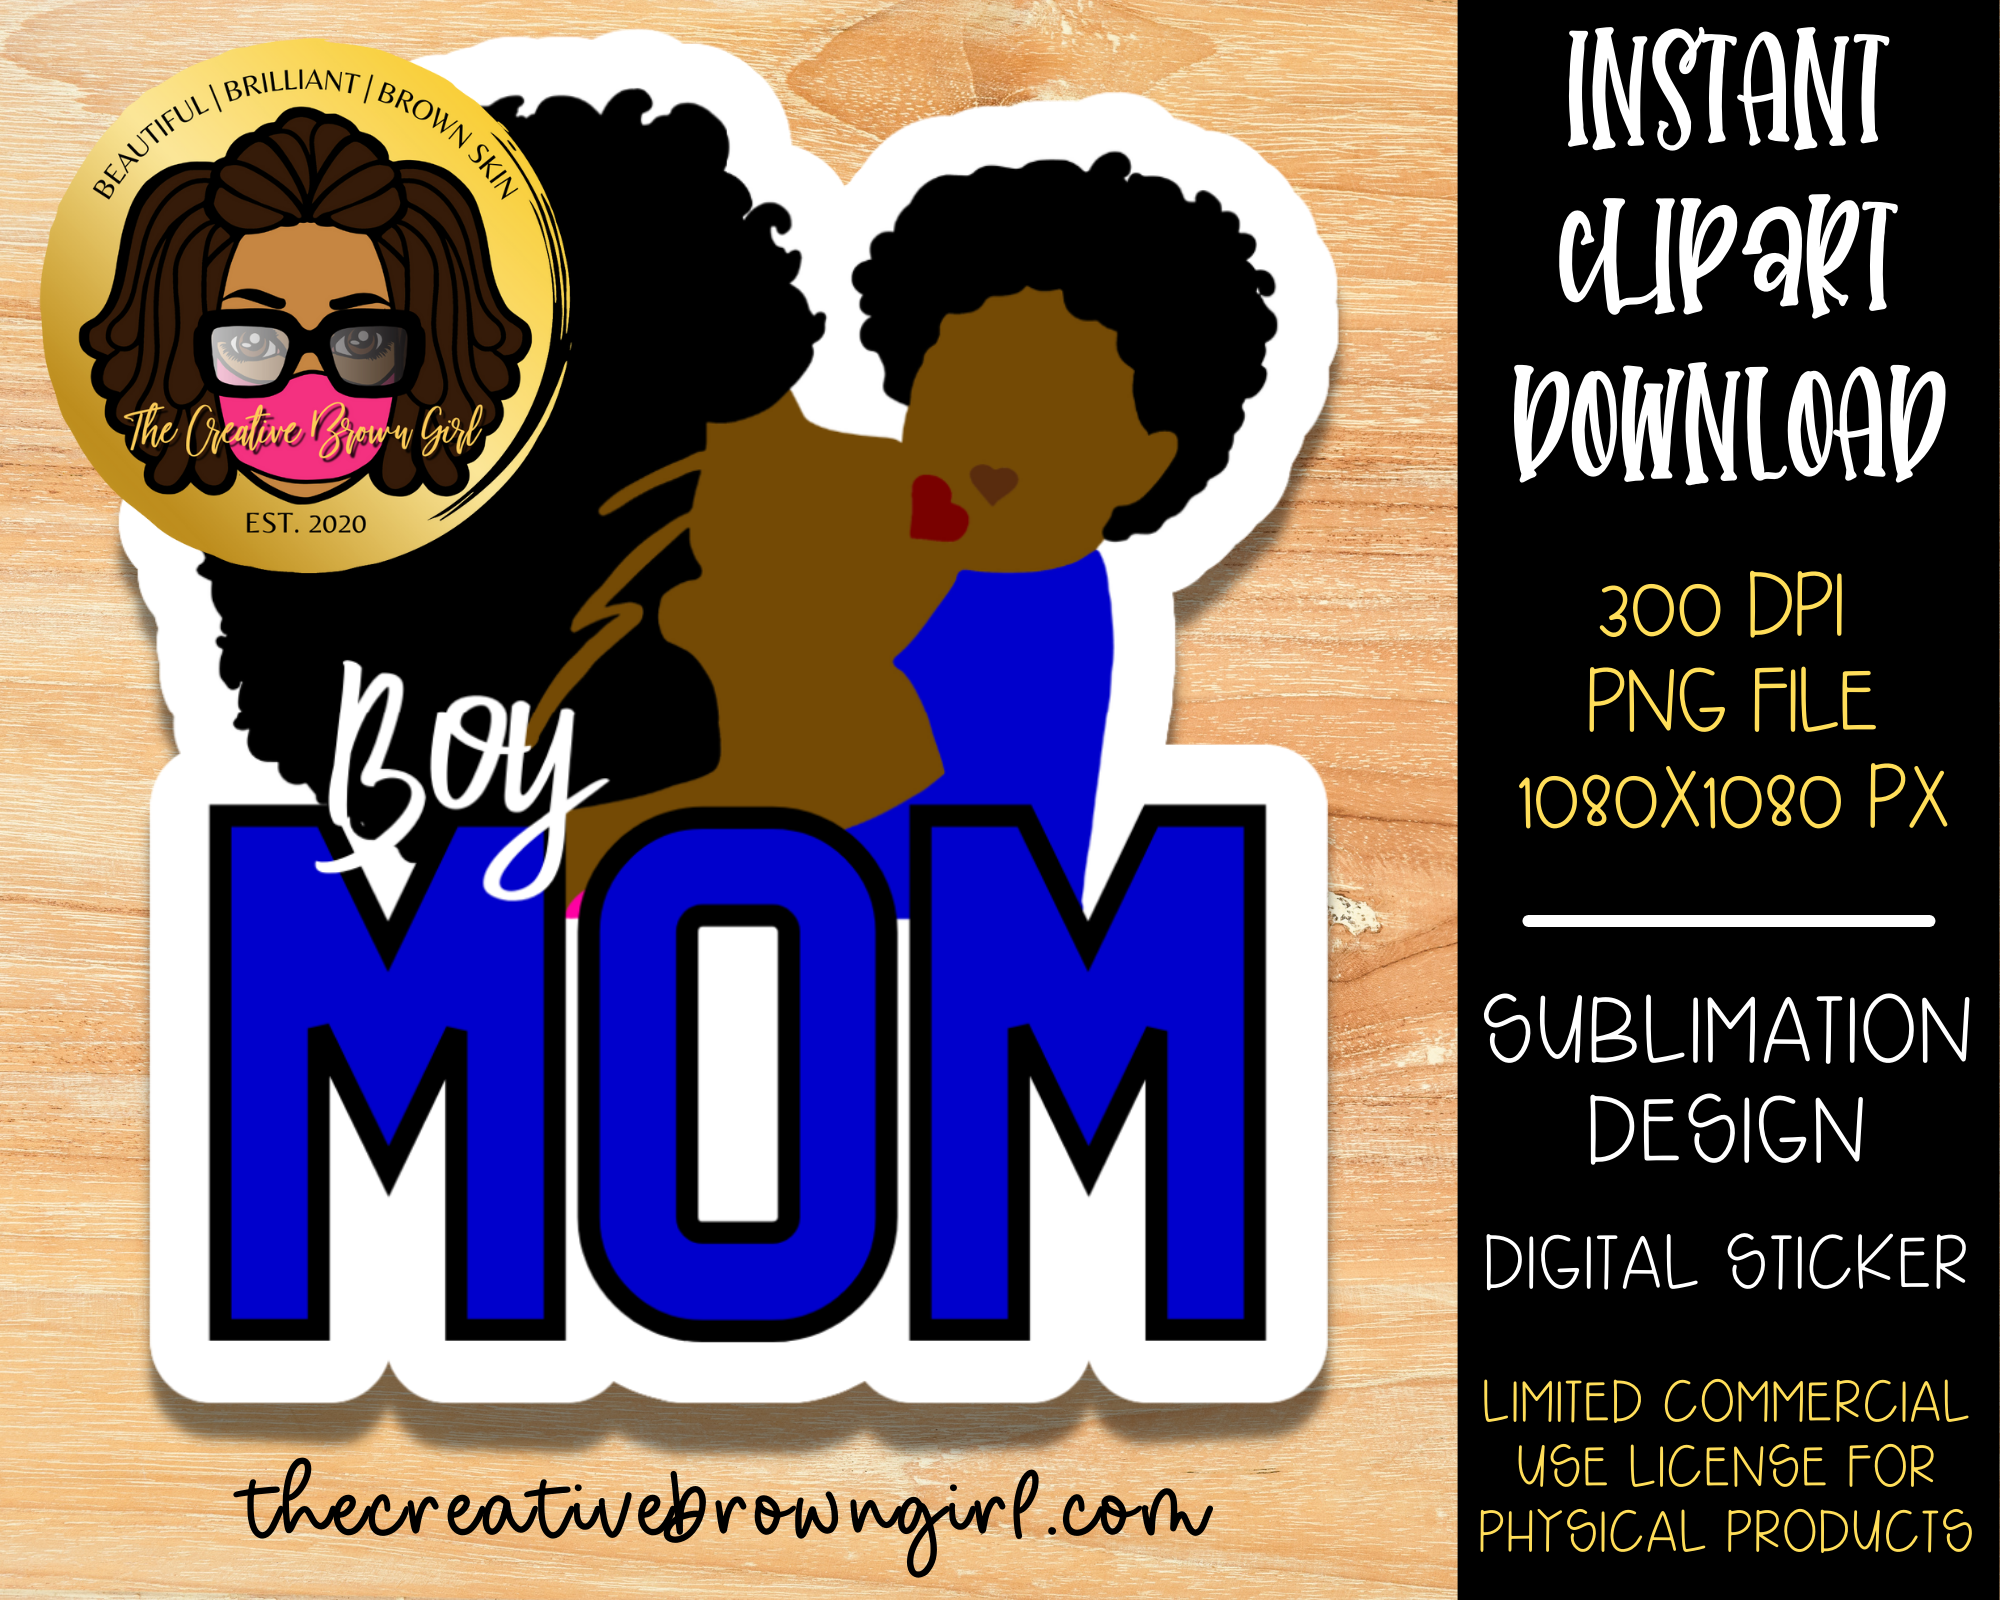 Mothers Day, Mother, Cartoon Mother And Child, Cartoon Mother And Daughter  PNG Hd Transparent Image And Clipart Image For Free Download - Lovepik |  401035844